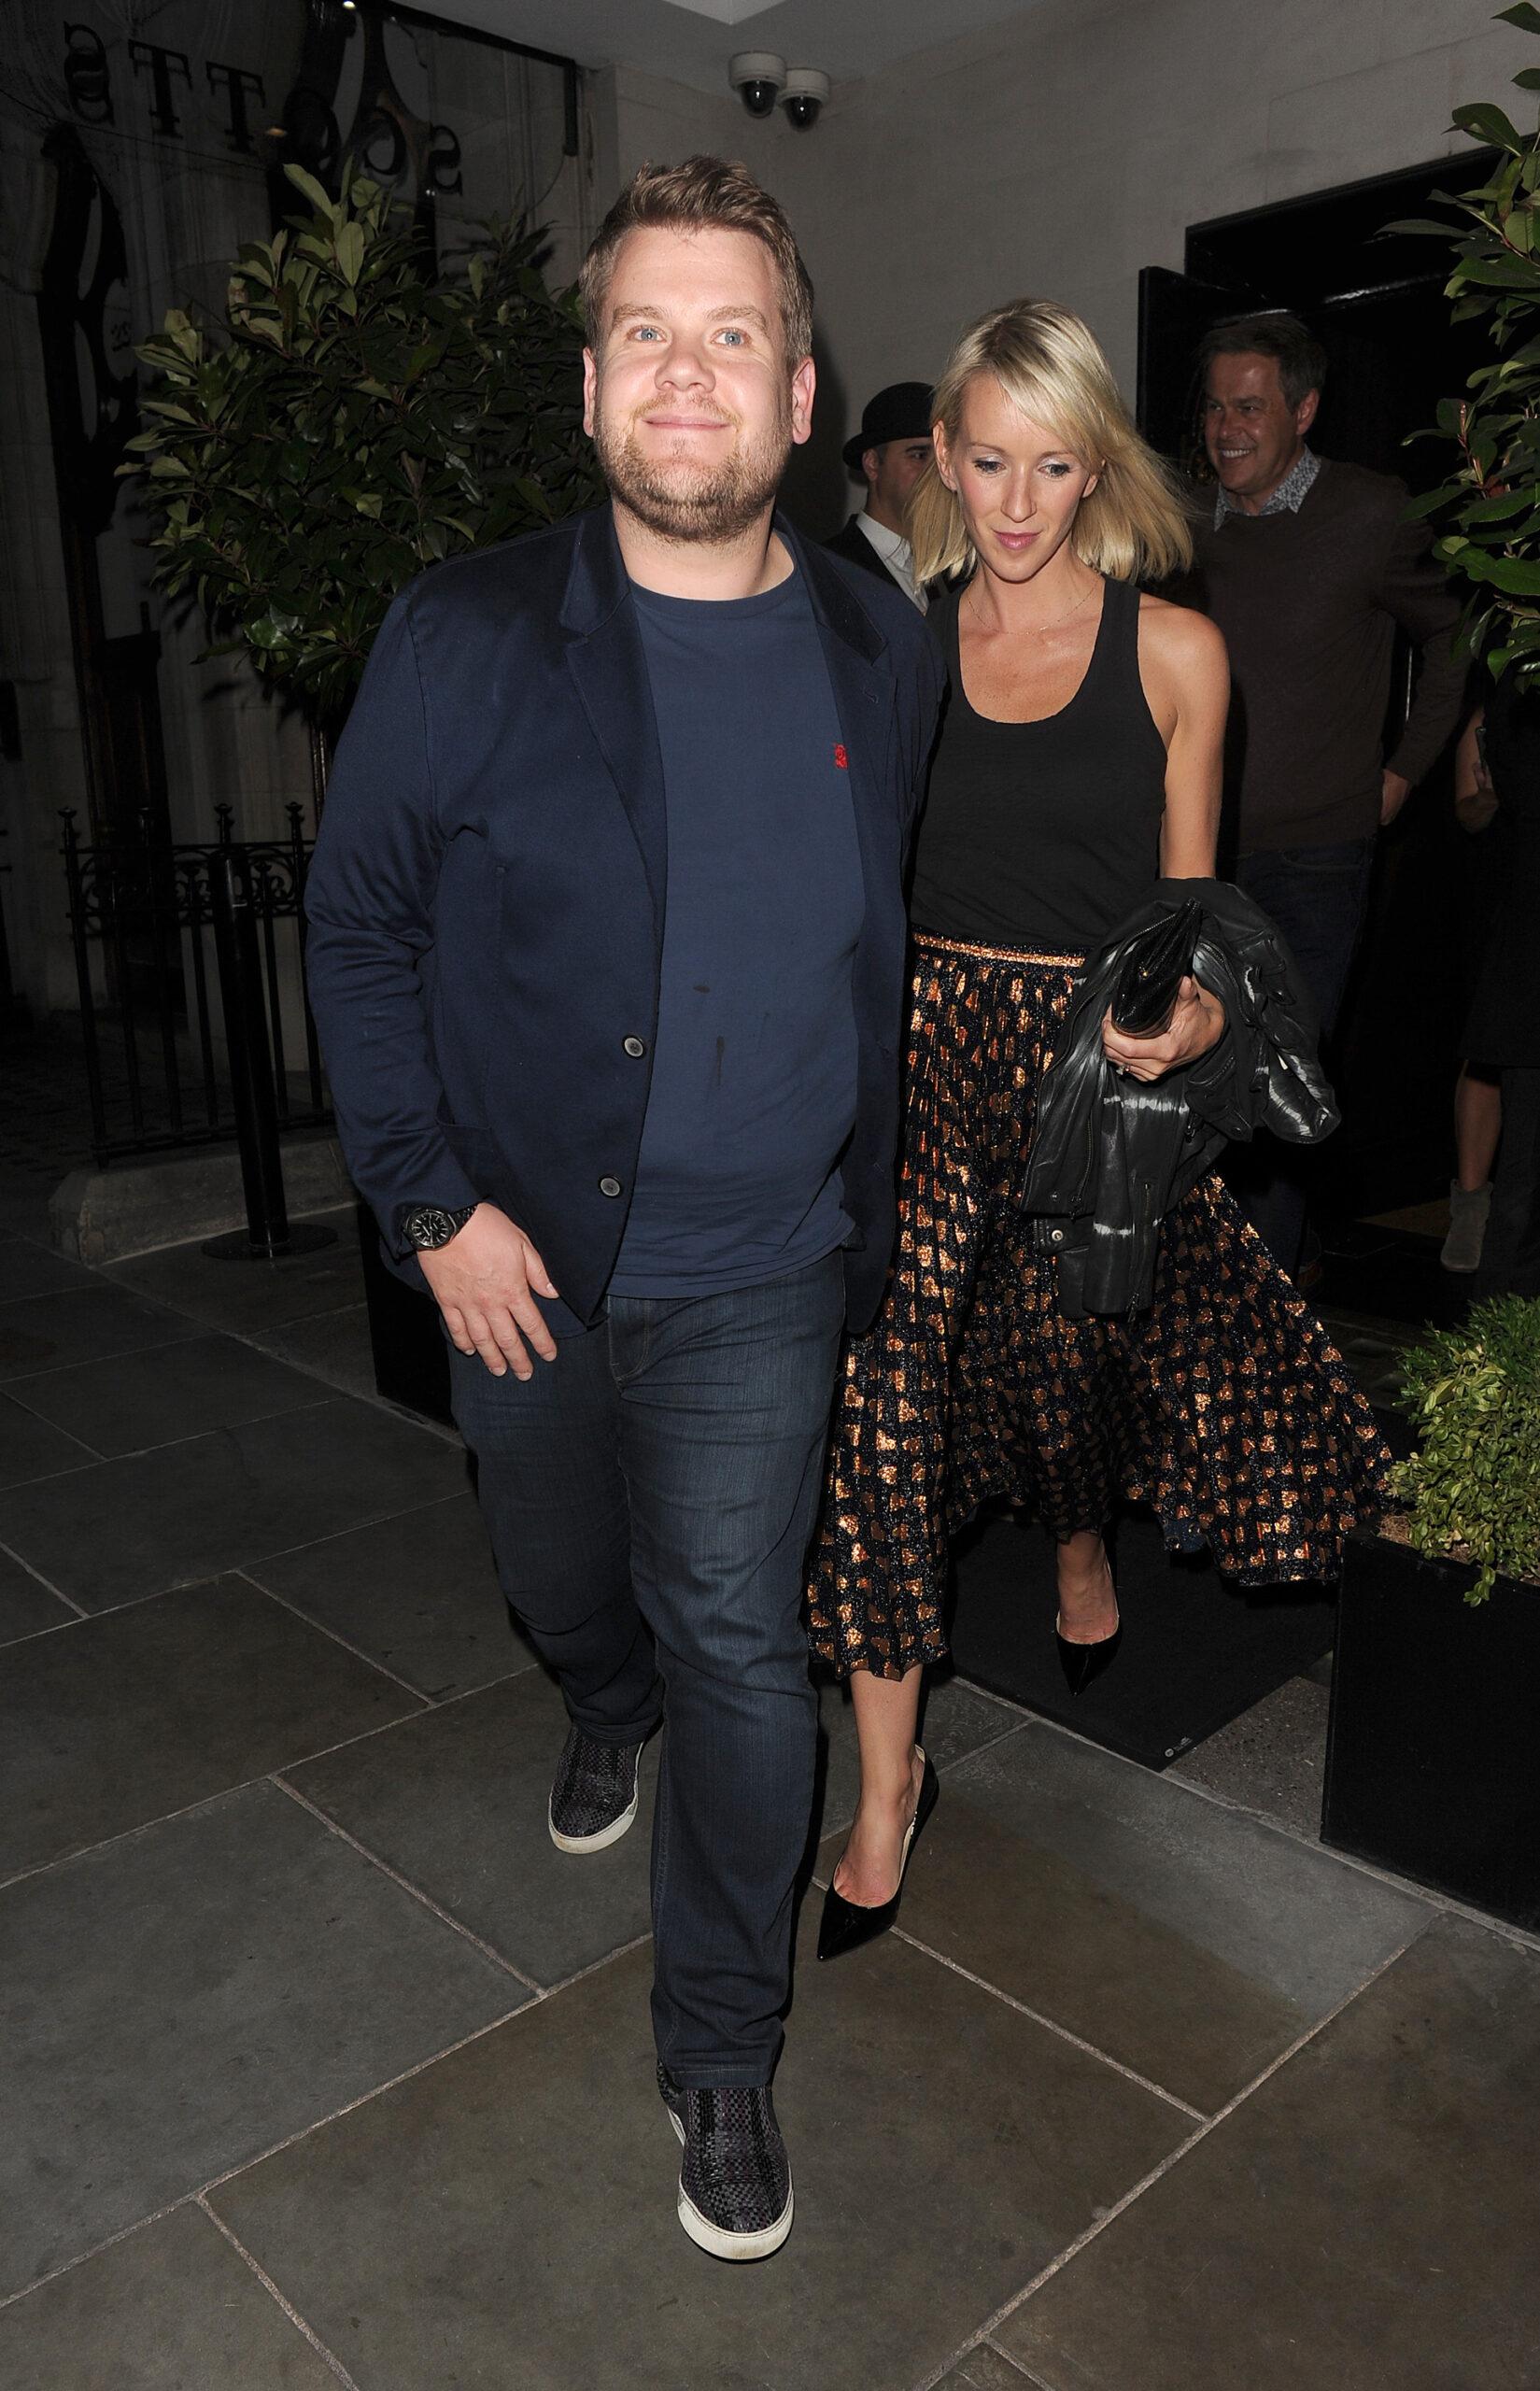 James Corden enjoys a long dinner with his wife Julia Carey at Scott apos s seafood restaurant in Mayfair The couple were joined by entrepreneur and star of TV show apos Dragon apos s Den apos Peter Jones and his partner Tara Capp